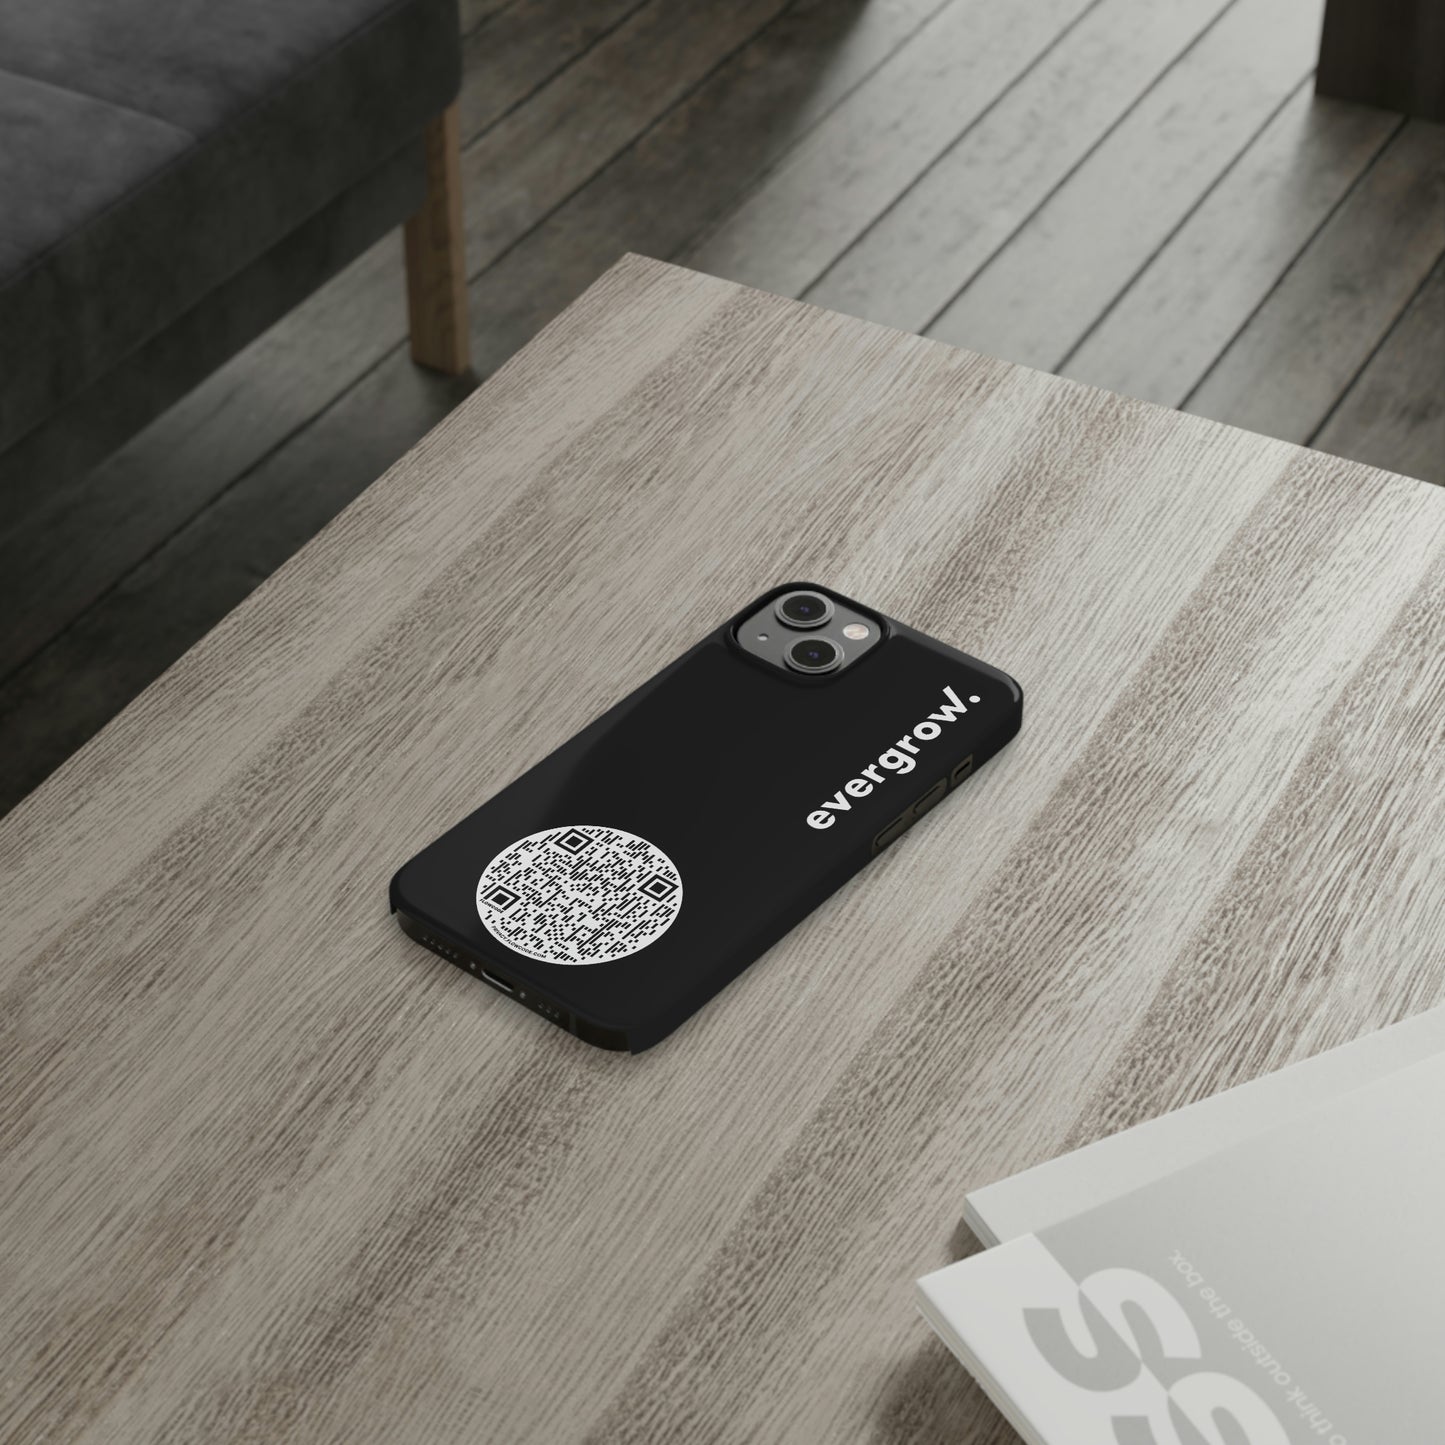 USA - Slim Phone Cases, Case-Mate - with evergrow logo and QR code